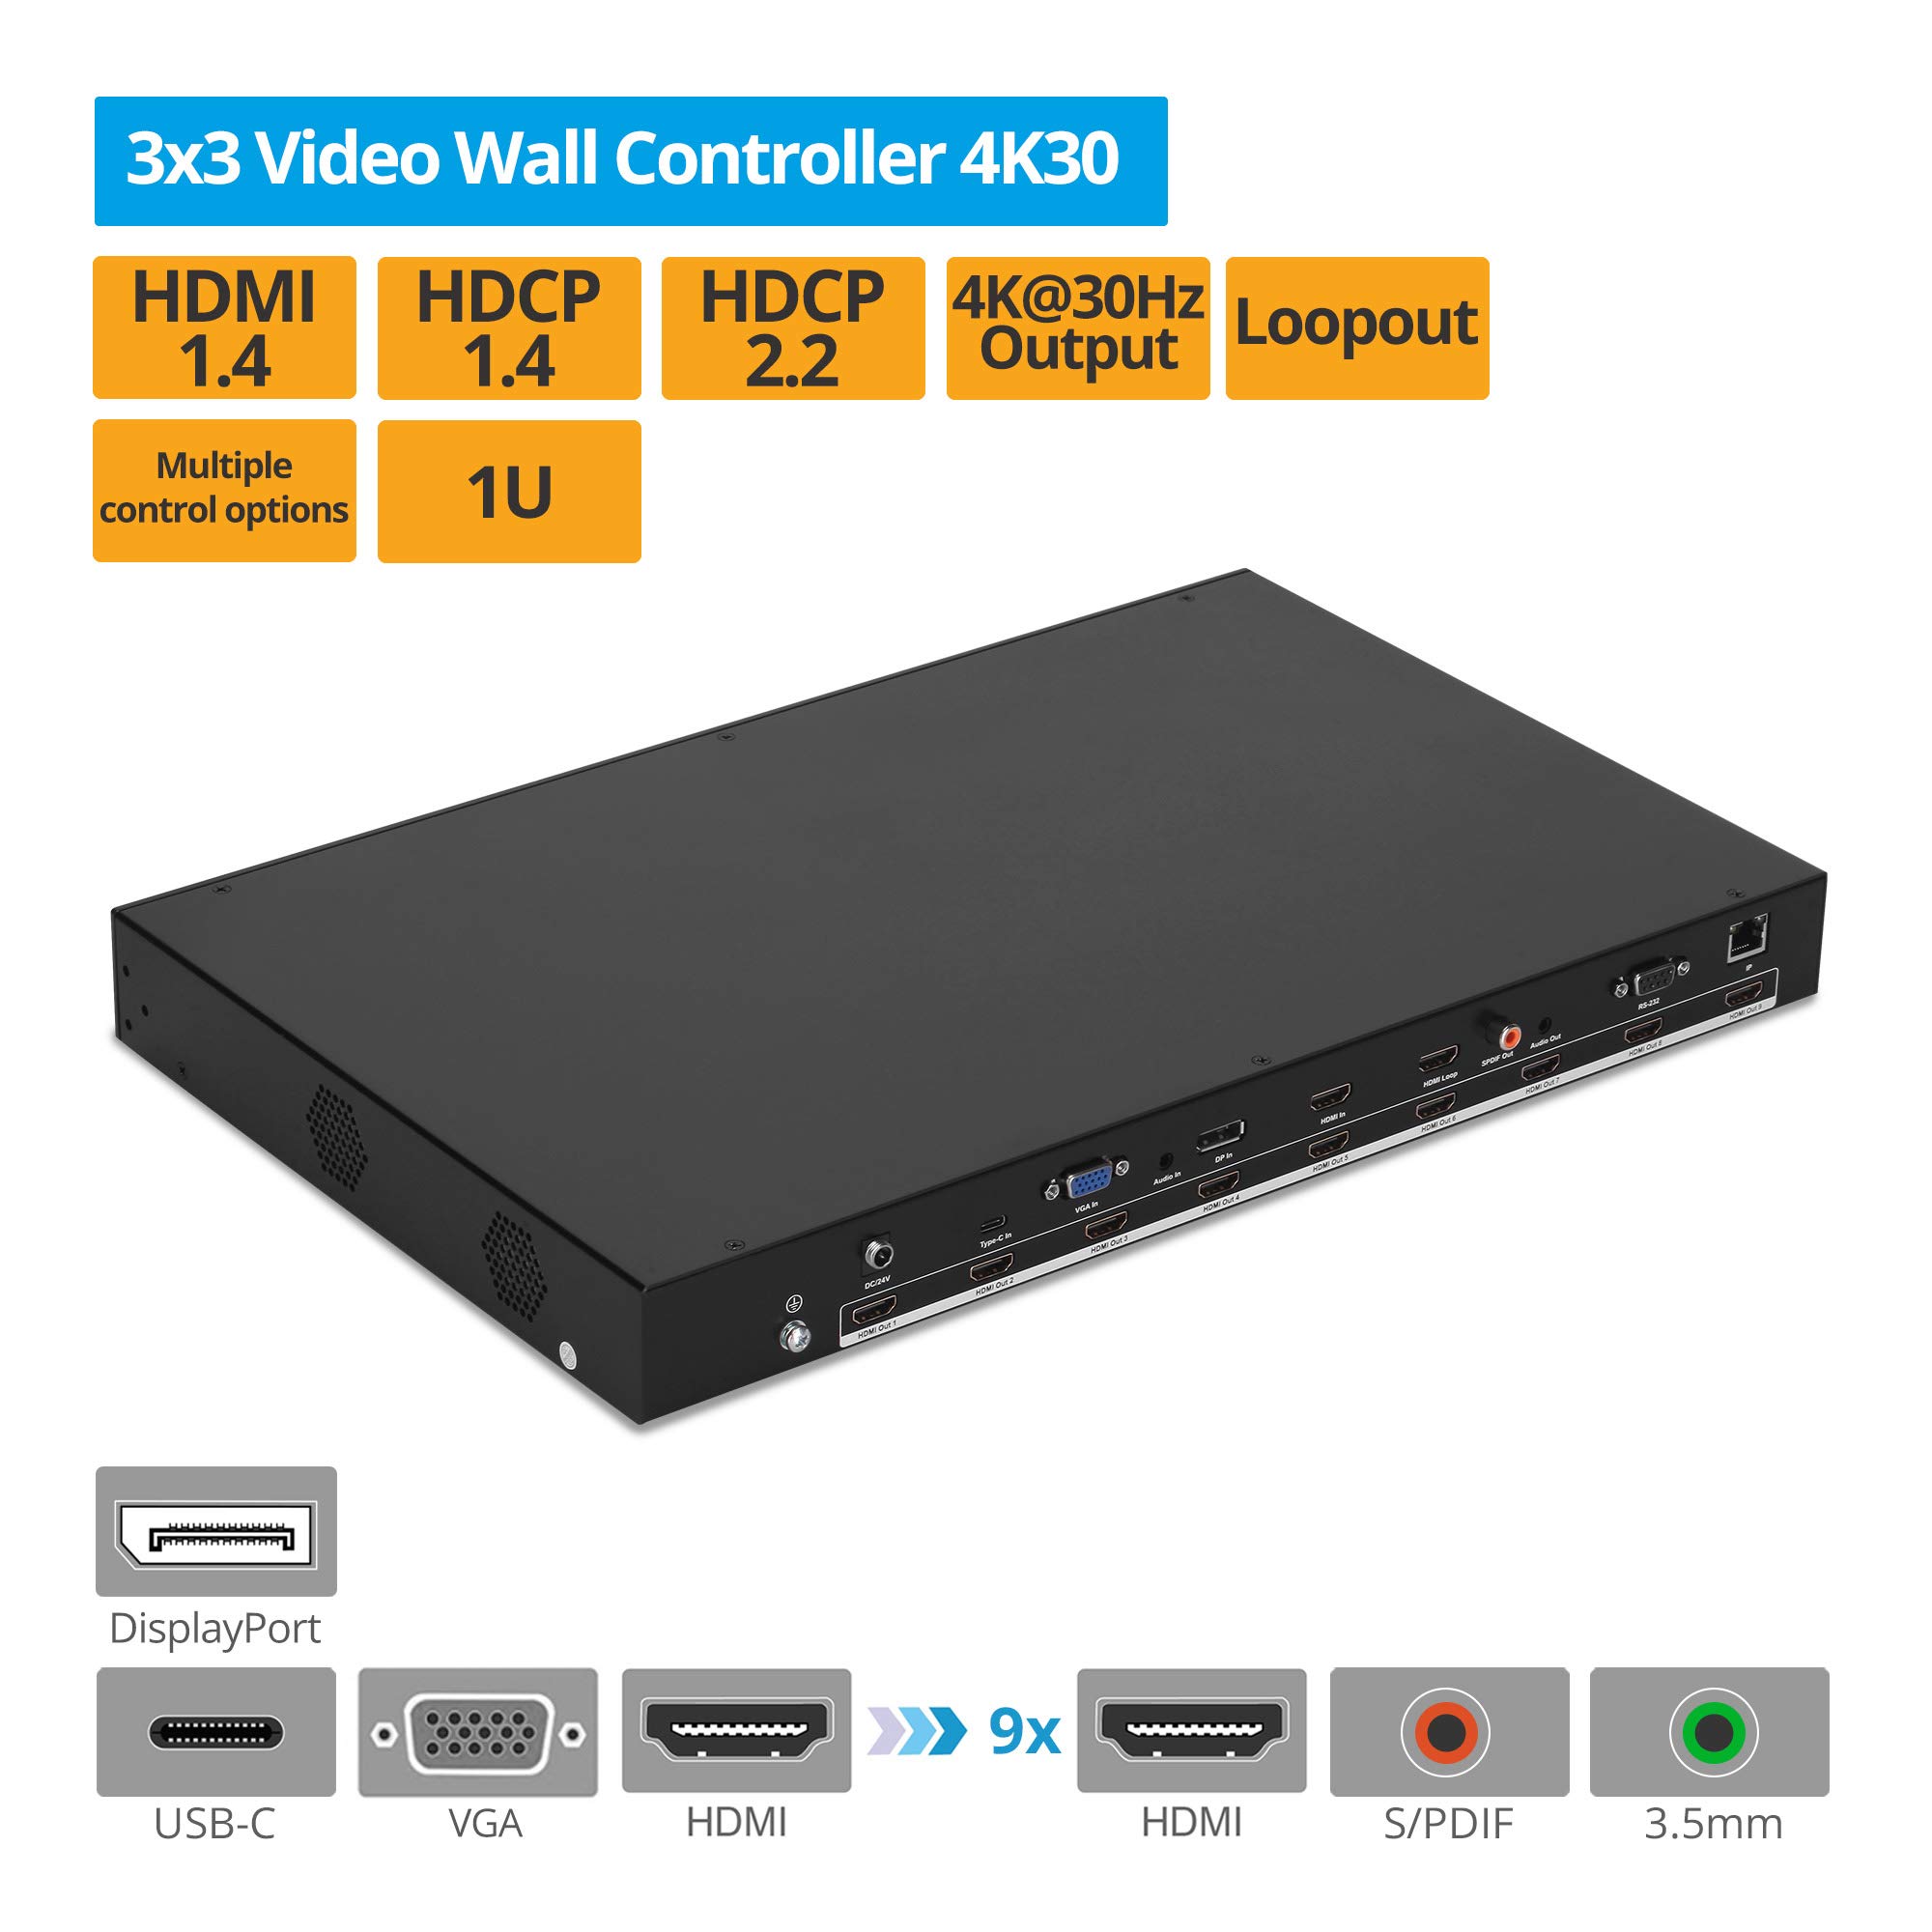 gofanco 3x3 Video Wall Controller and Processor – Up to 4K 30Hz, Inputs (USB-C, VGA, DP, HDMI) - 180º Rotate, Edge Correction, 1U, Audio Extractor - 25 Display Modes, Cascade up to 10x10 (Videowall33)